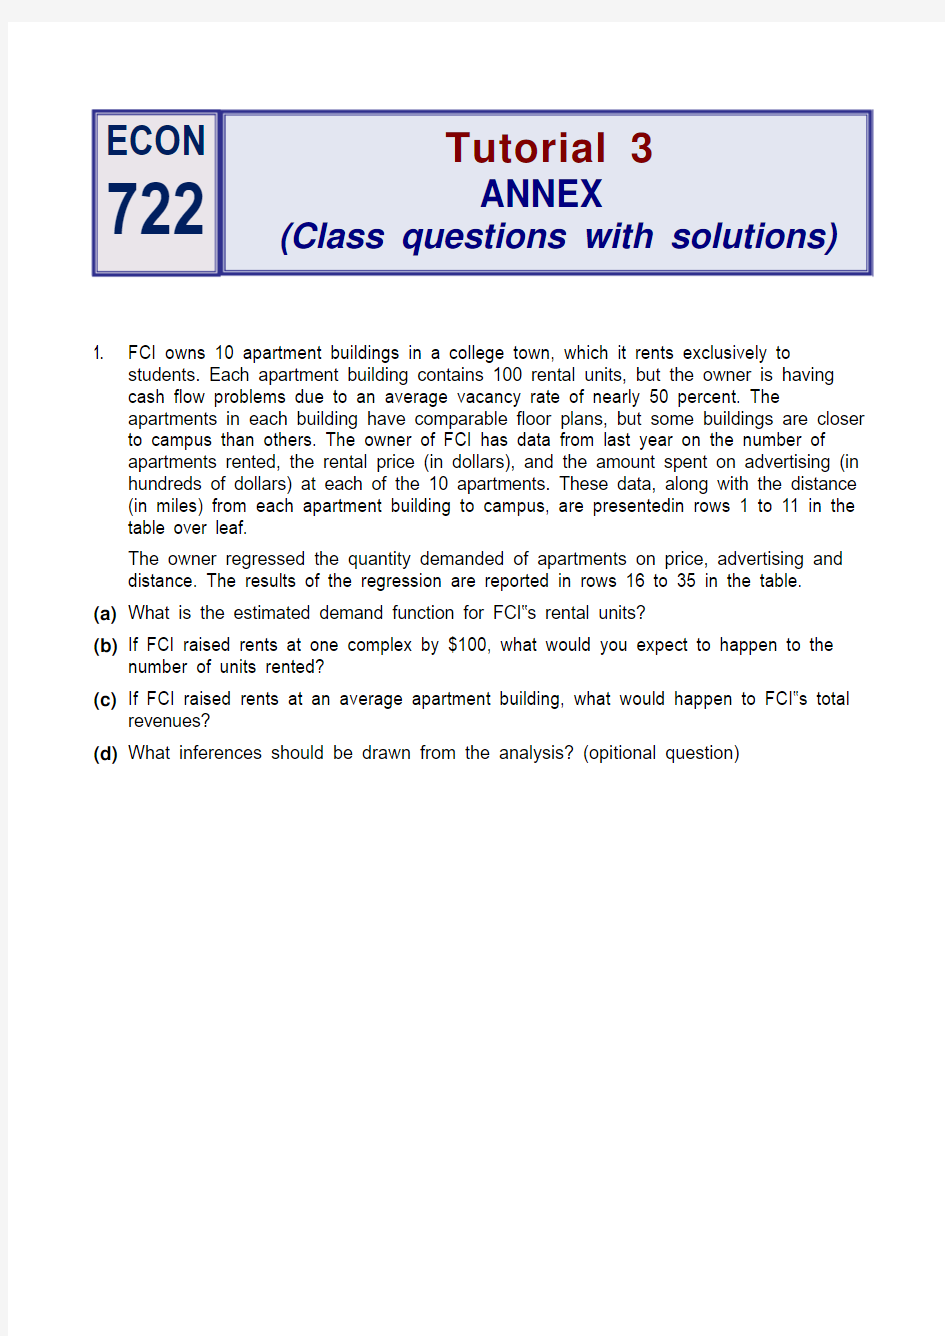 Econ722 Tutorial 3 ANNEX (Class questions with solutions)